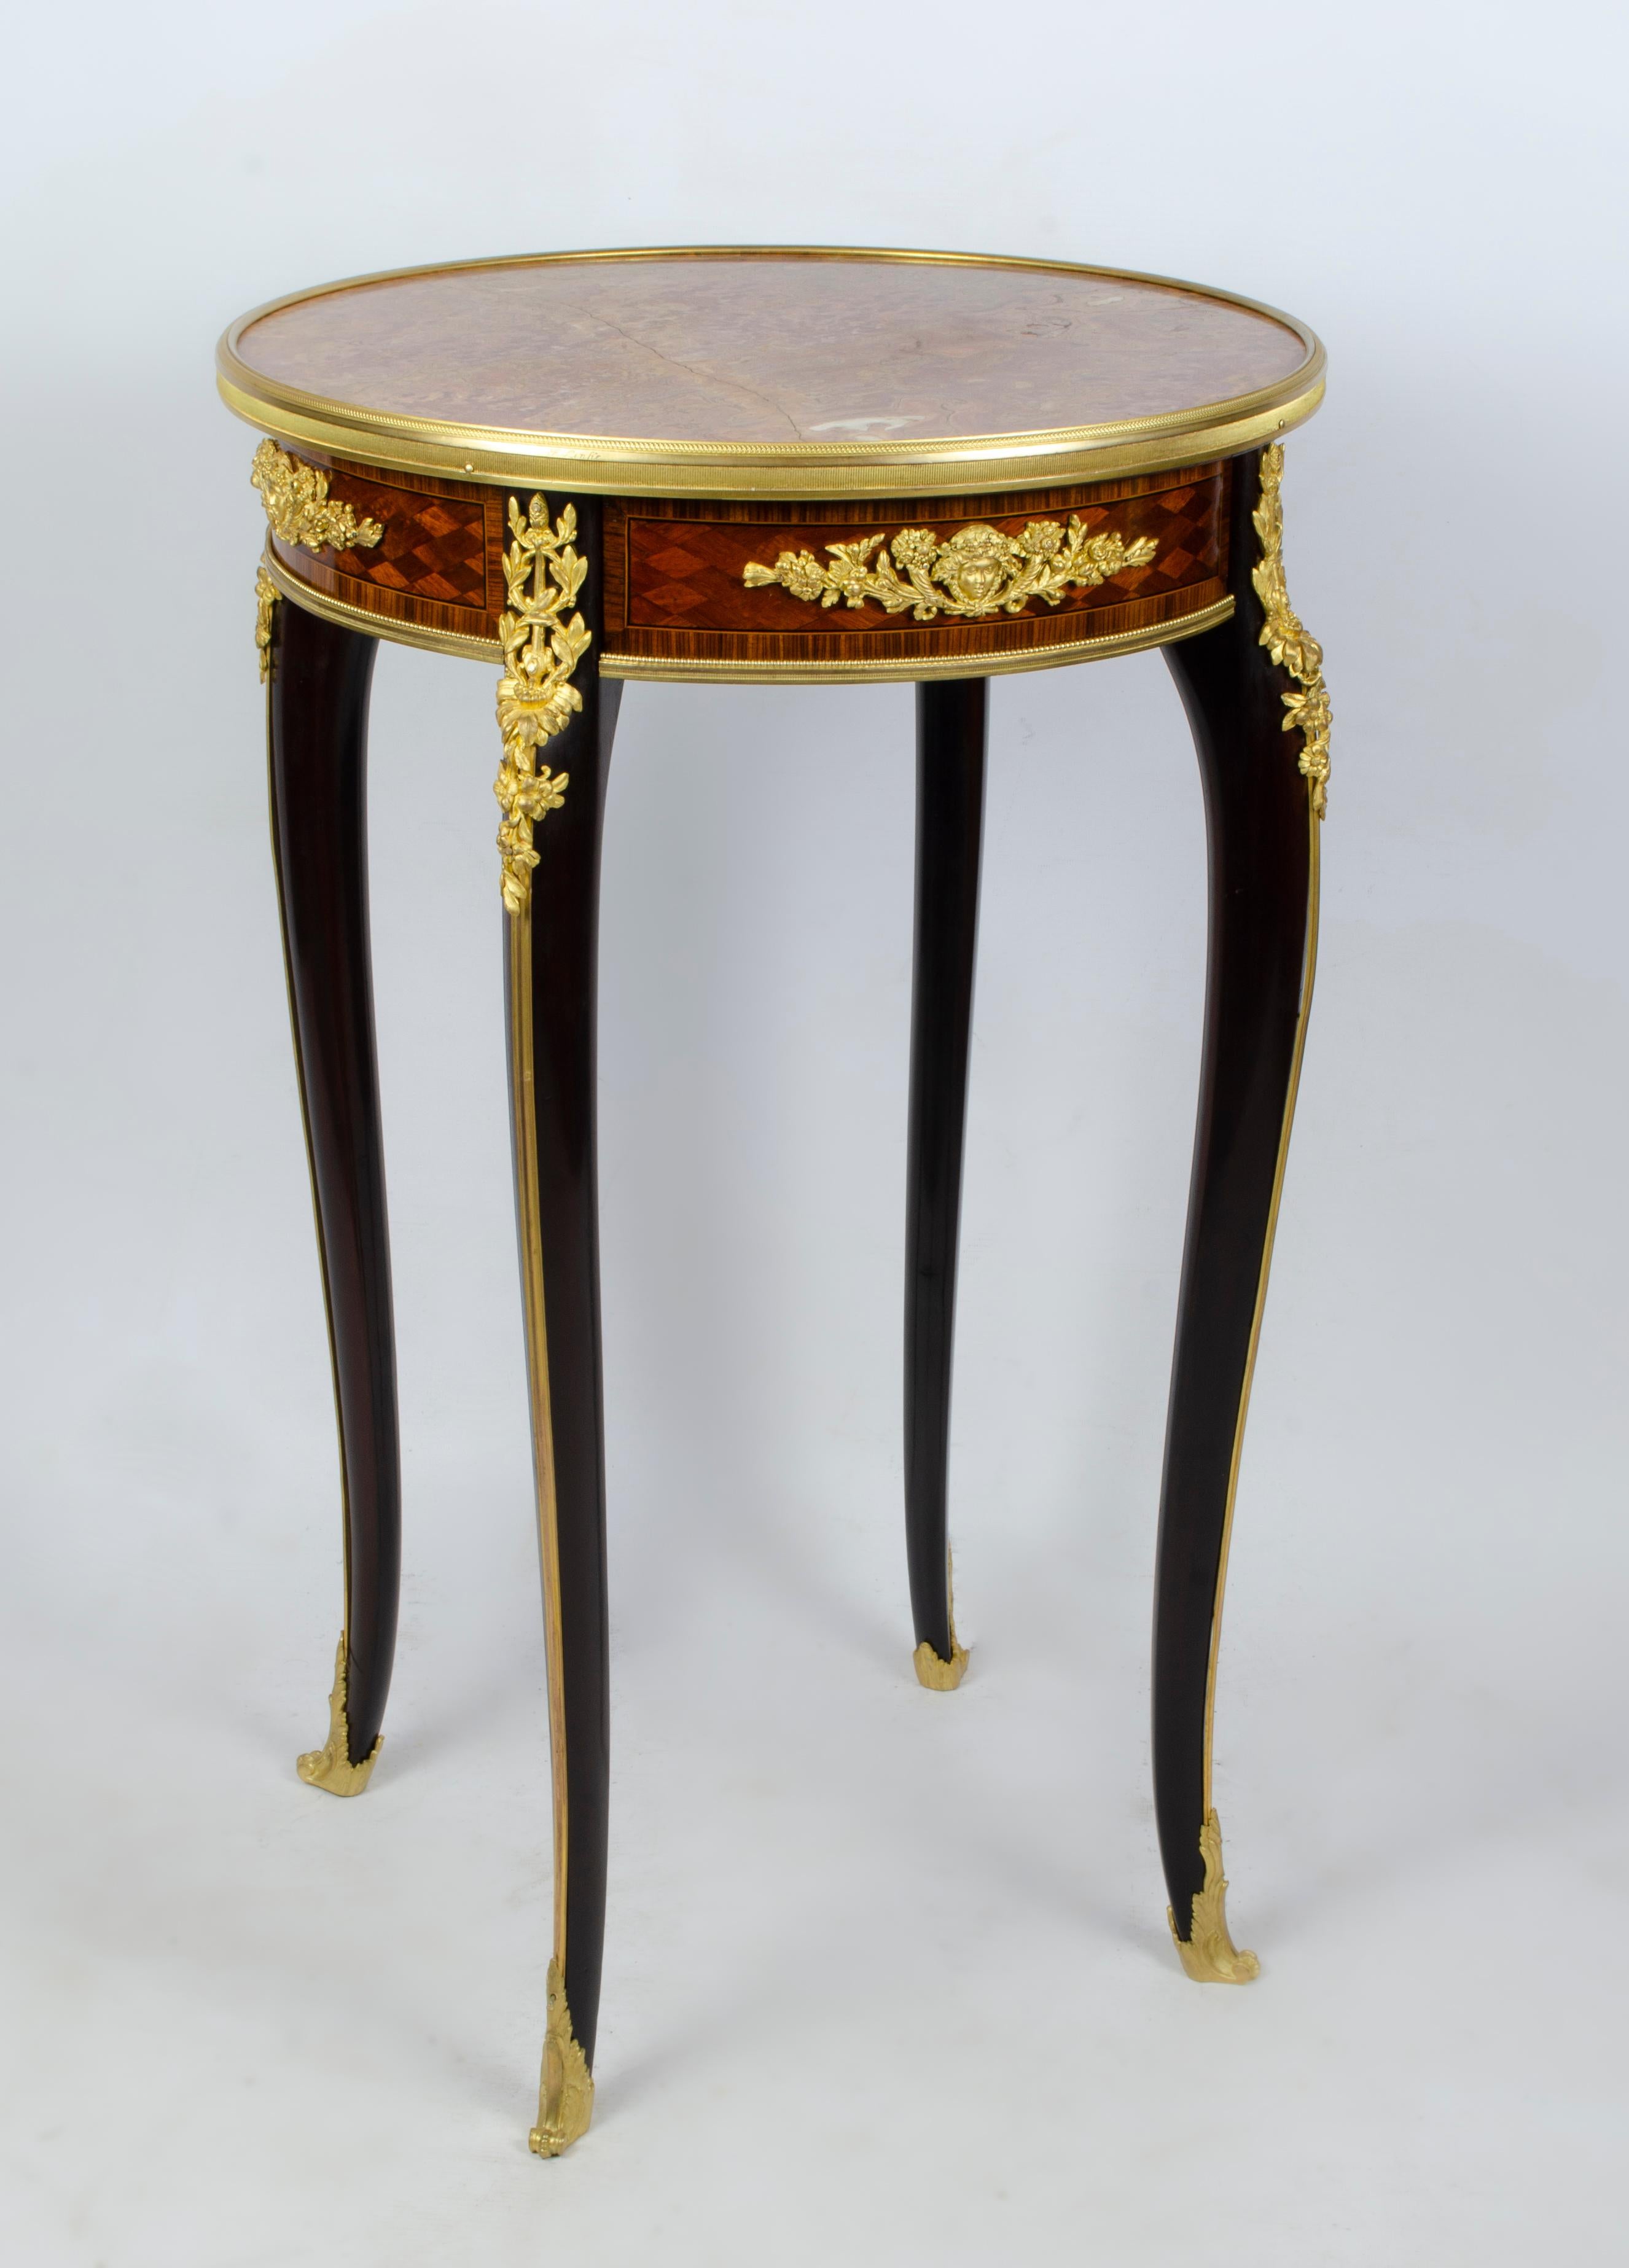 Mahogany Gueridon with a European marble top and gilt bronze inlays on a lozenge parquet frieze centered by a flanked gilt bronze mask and flowers emitting a cornucopia. The table is raised on hipped cabriole legs topped by finely cast gilt bronze